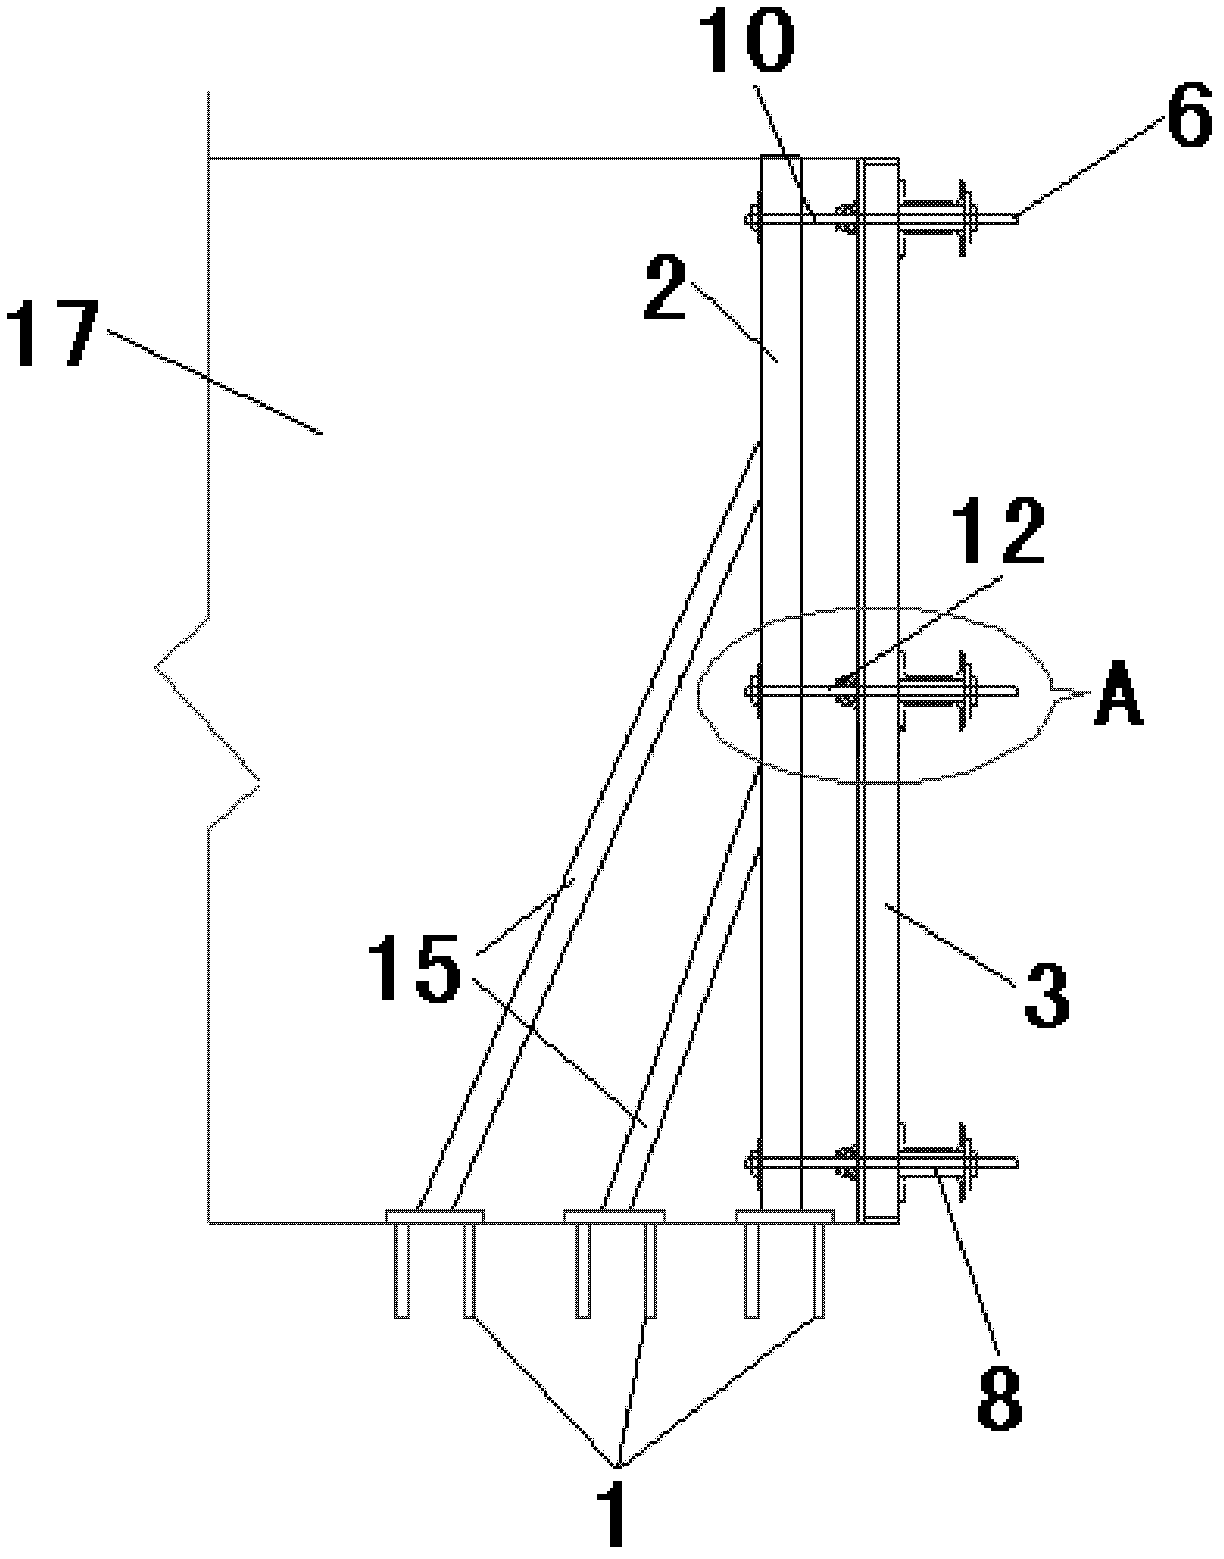 Template for large-volume concrete casting